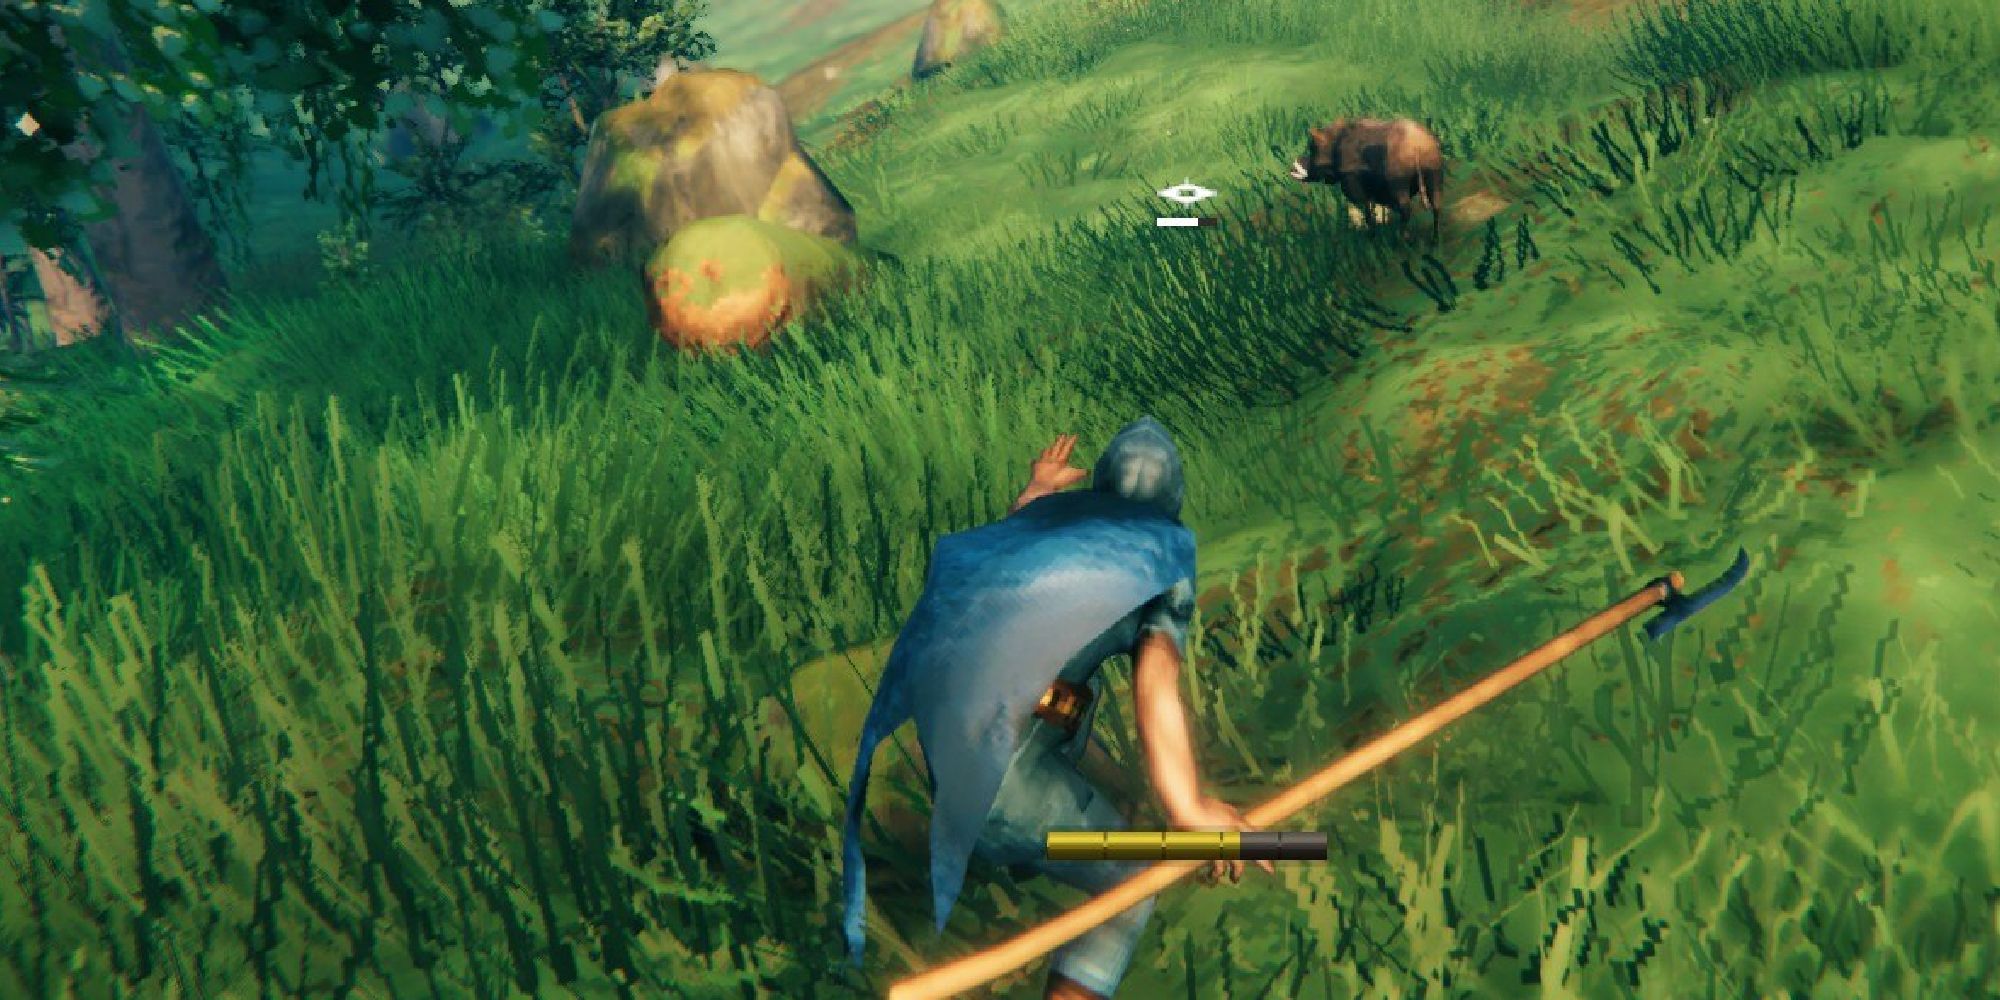 valheim player crowing and looking at a boar